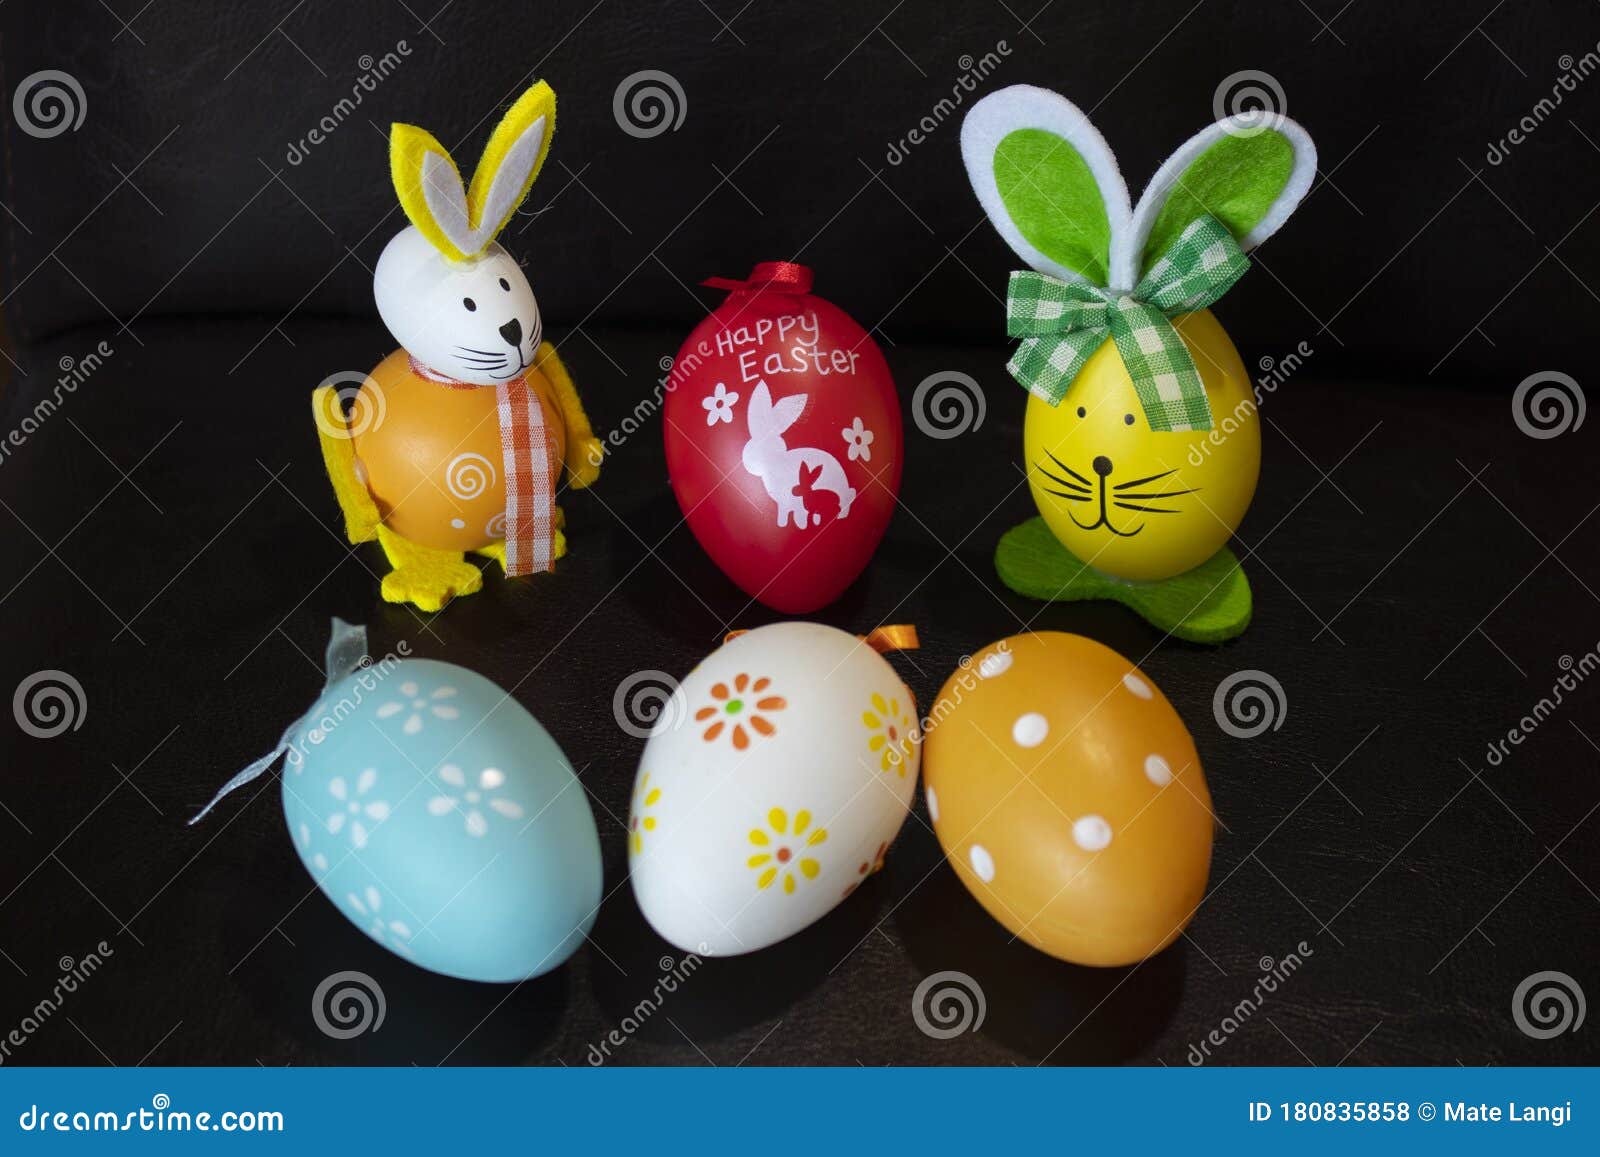 Yellow White Easter Egg Decorations 